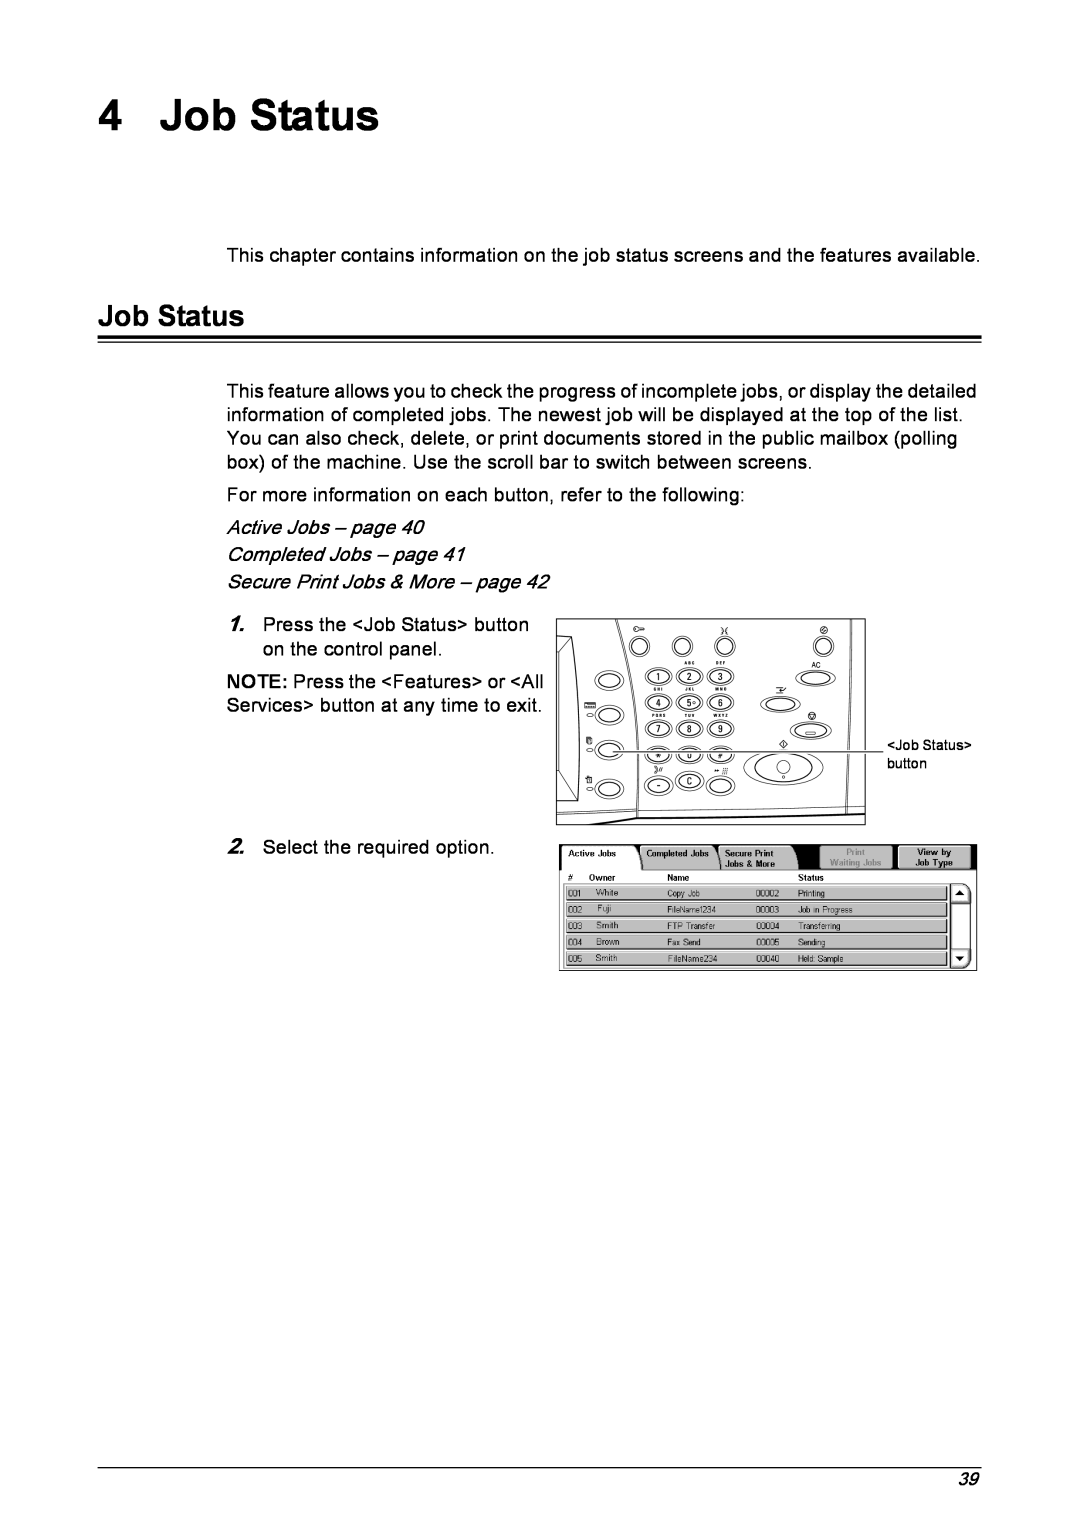 Xerox 5222 manual Job Status, Active Jobs – page Completed Jobs – page, Secure Print Jobs & More – page 